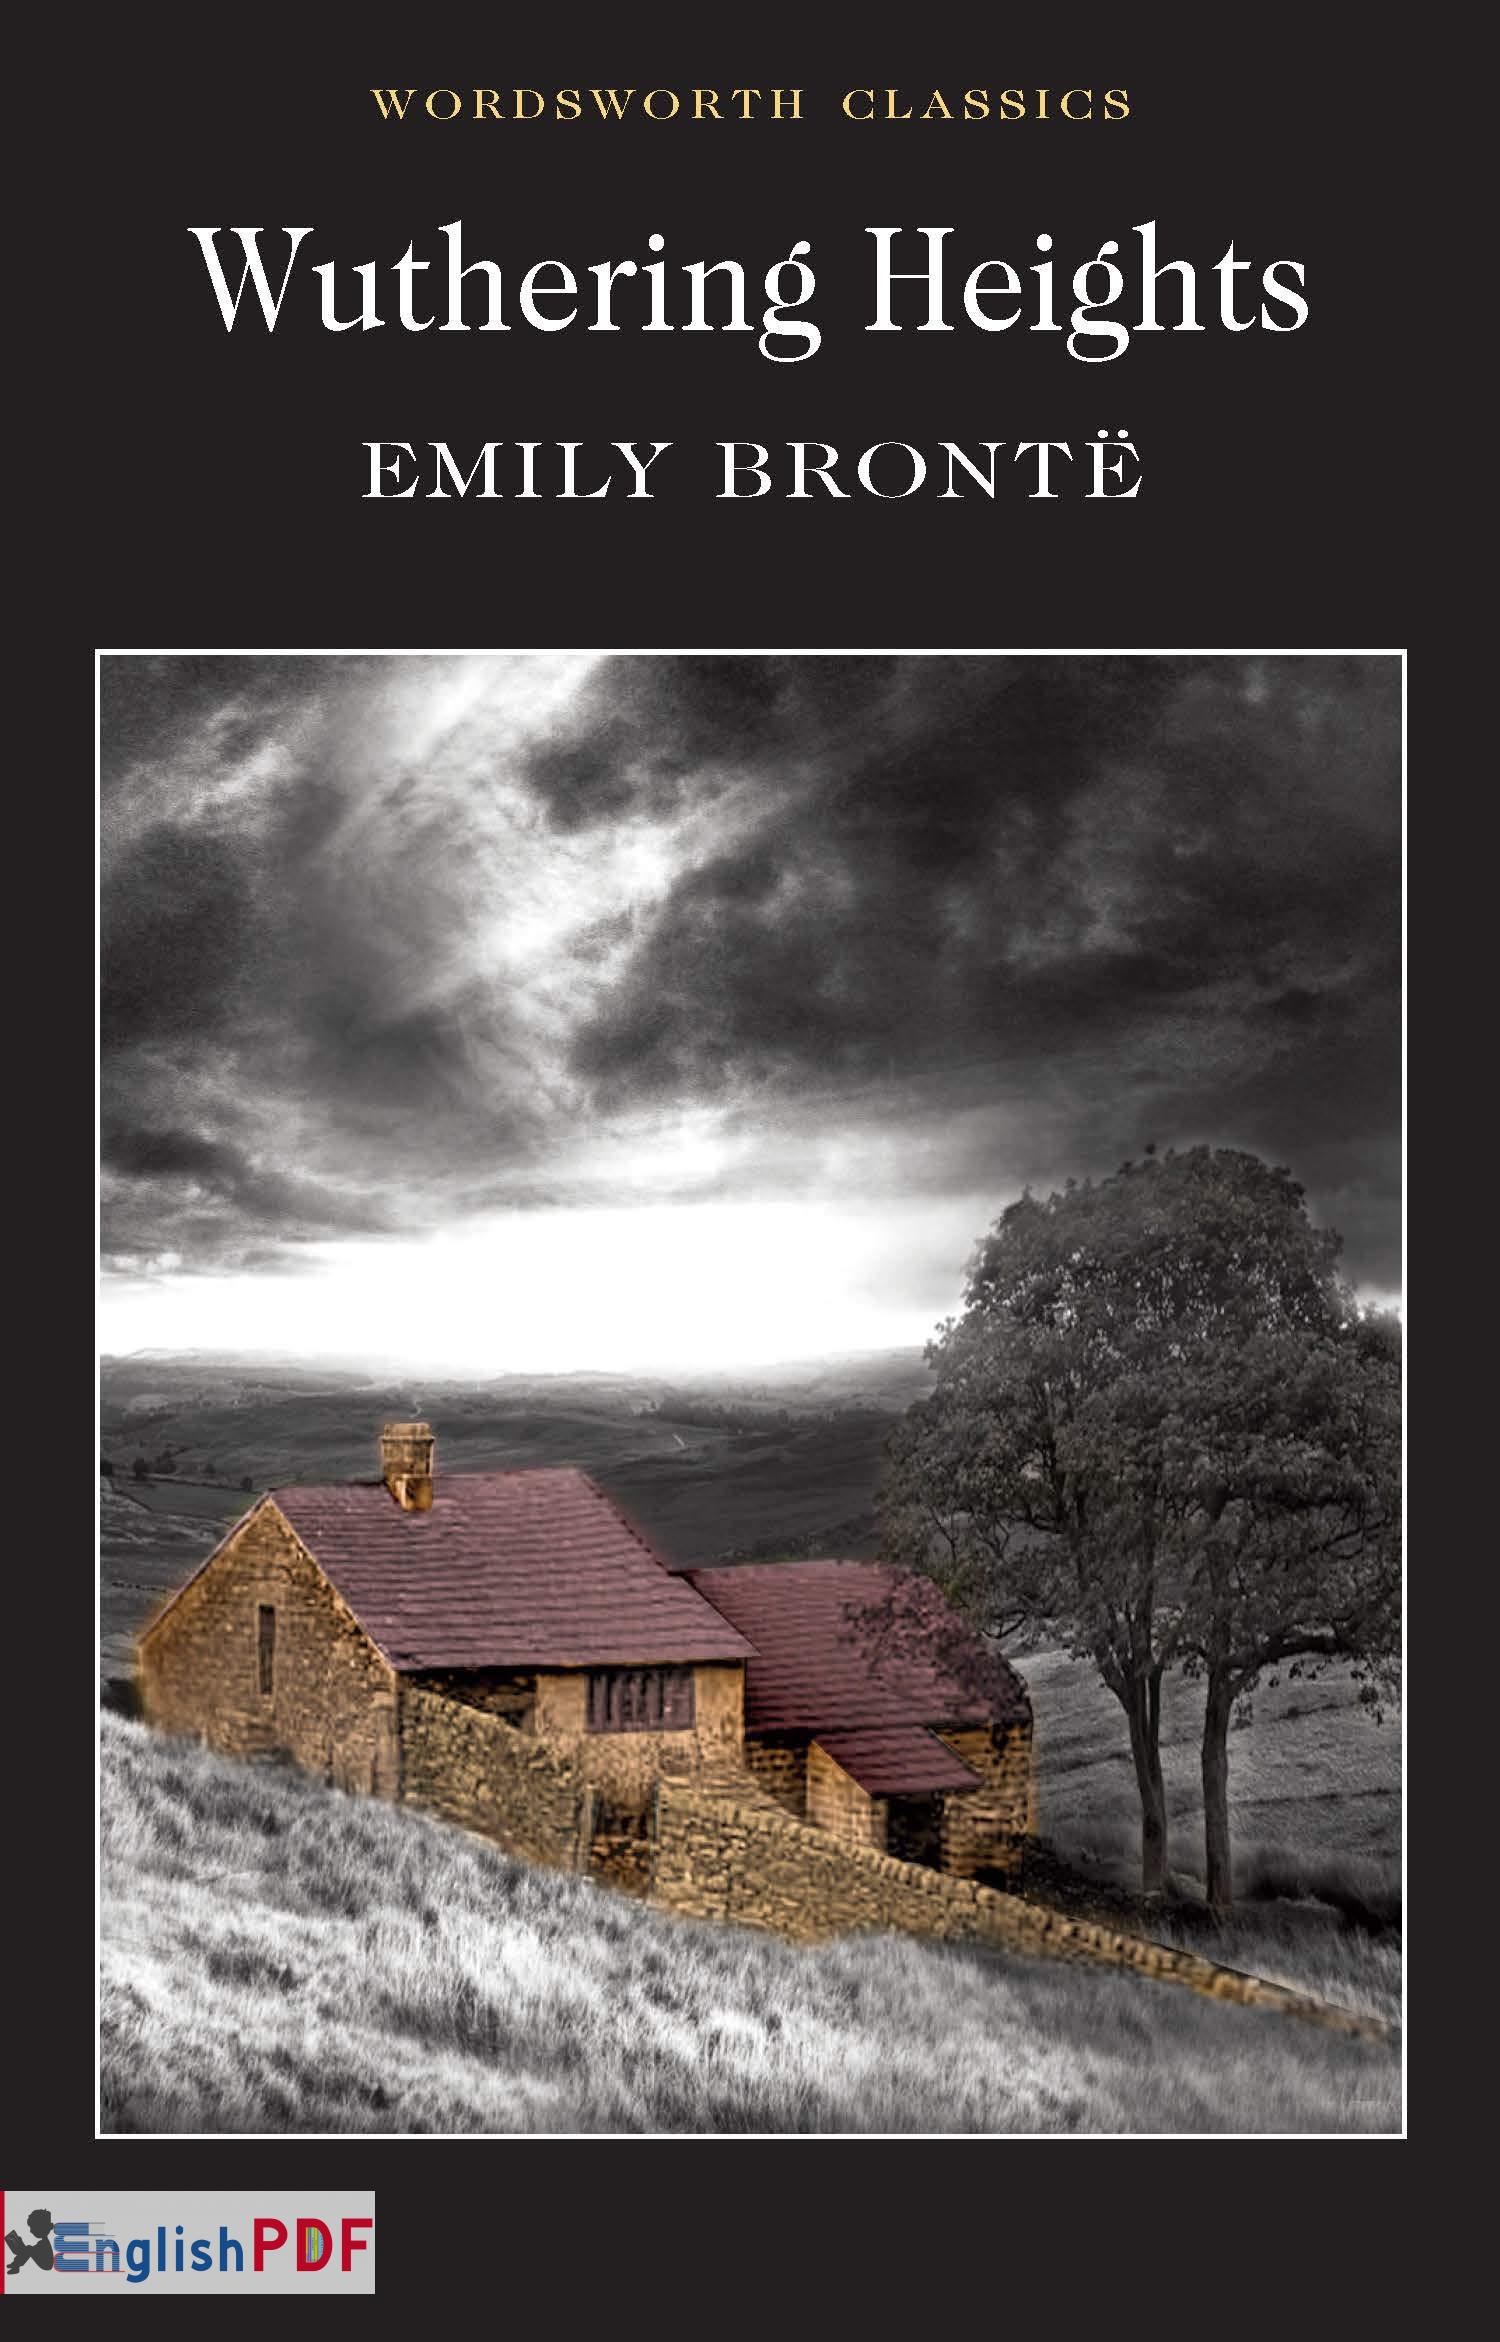 Wuthering Heights PDF By EnglishPDF